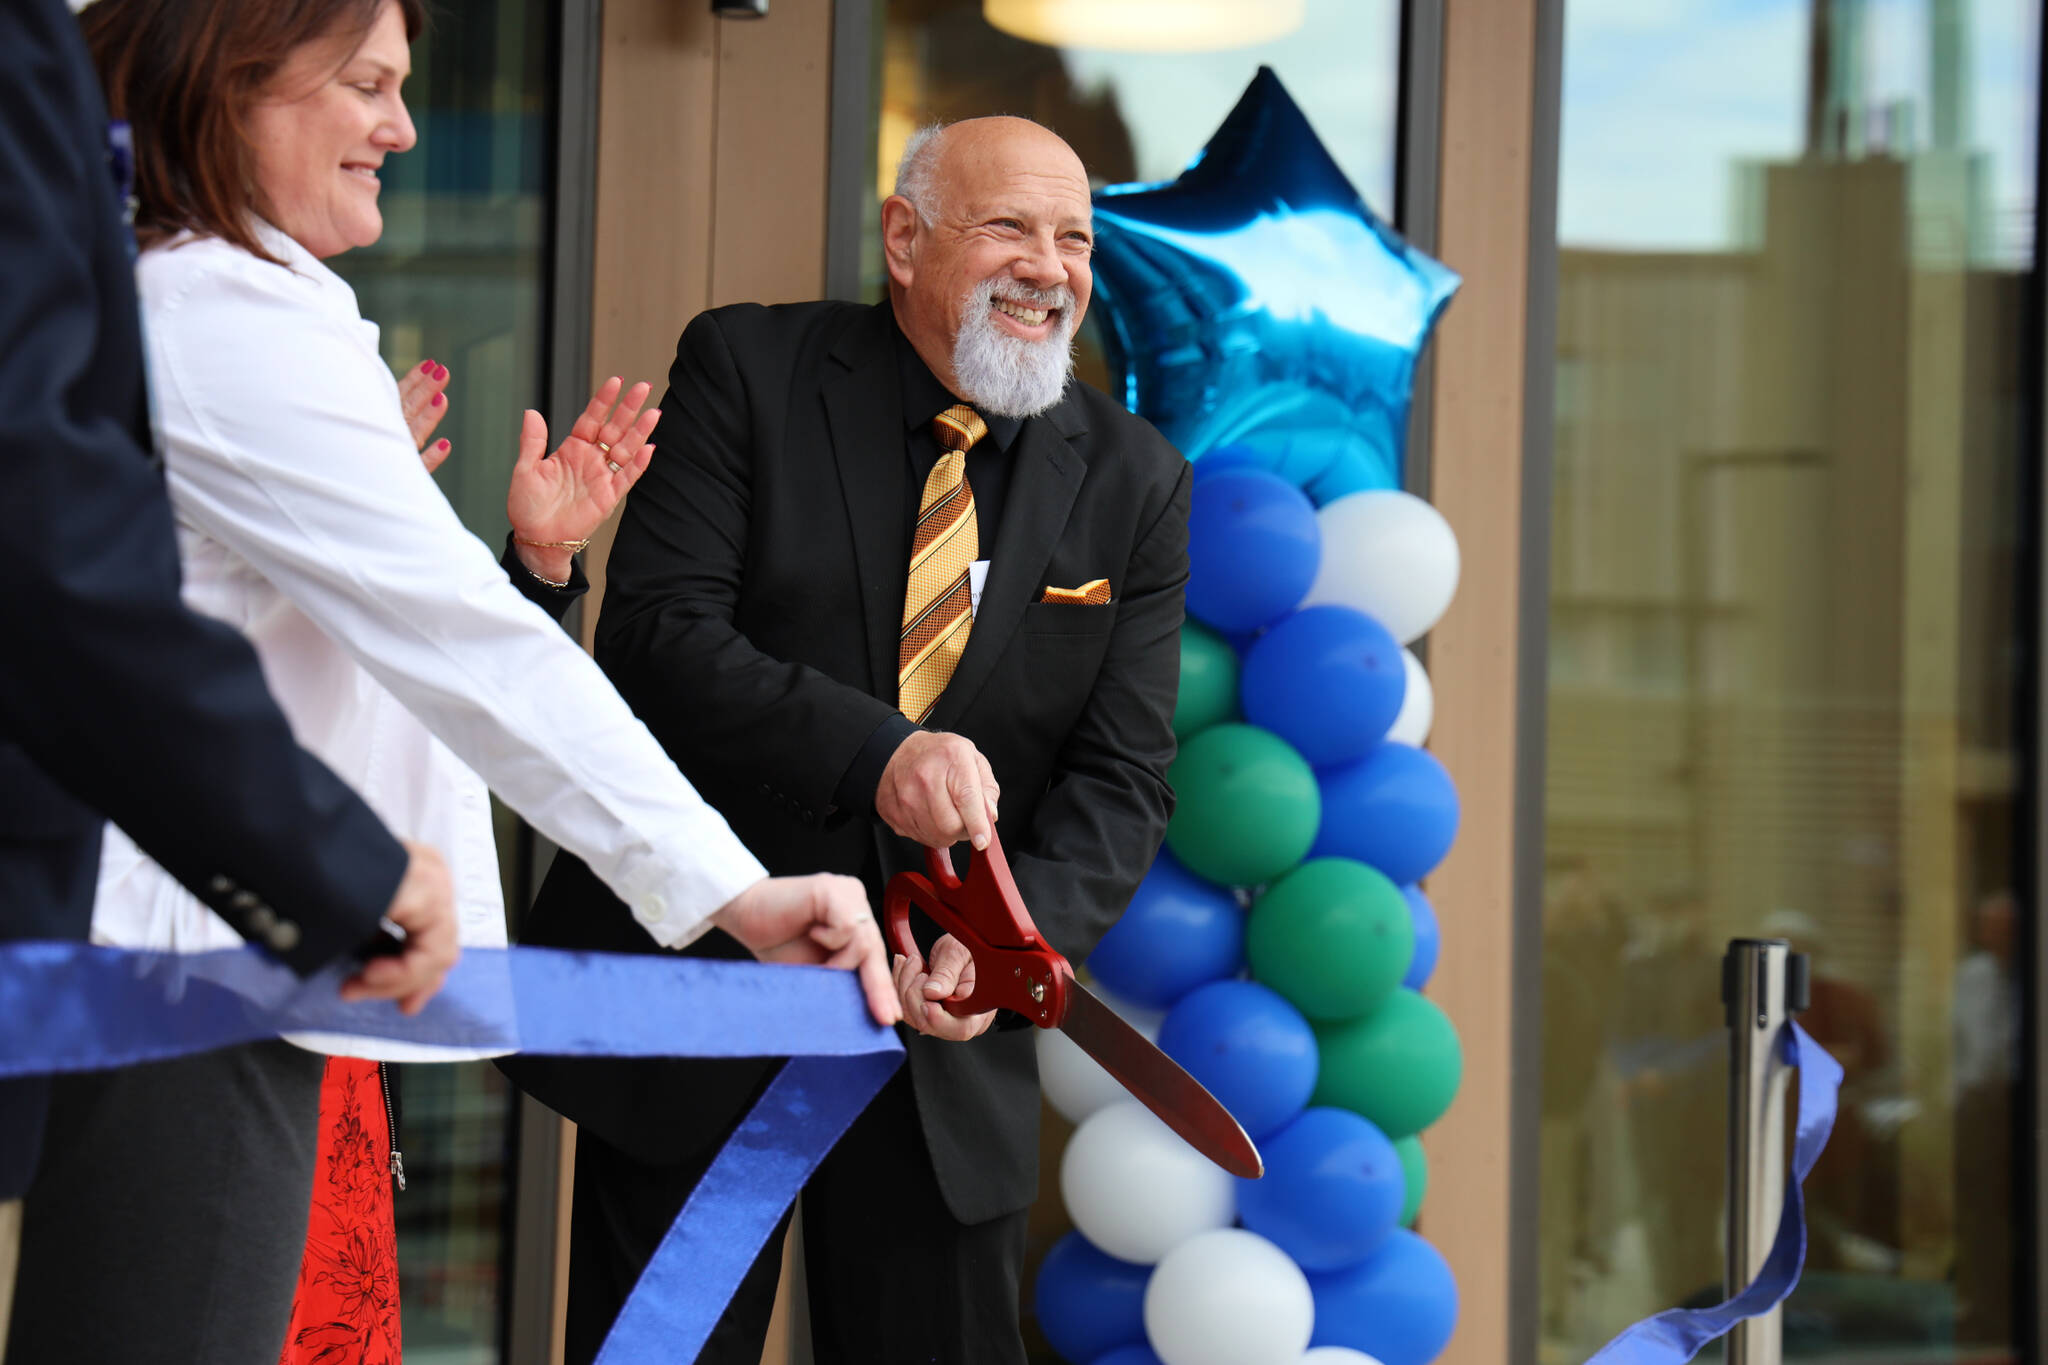 Bartlett Regional Hospital Board President Kenny Solomon-Gross cuts a ribbon in front of the doors to the hospital’s new Aurora Behavioral Health Center unveiled Wednesday evening. (Clarise Larson / Juneau Empire)